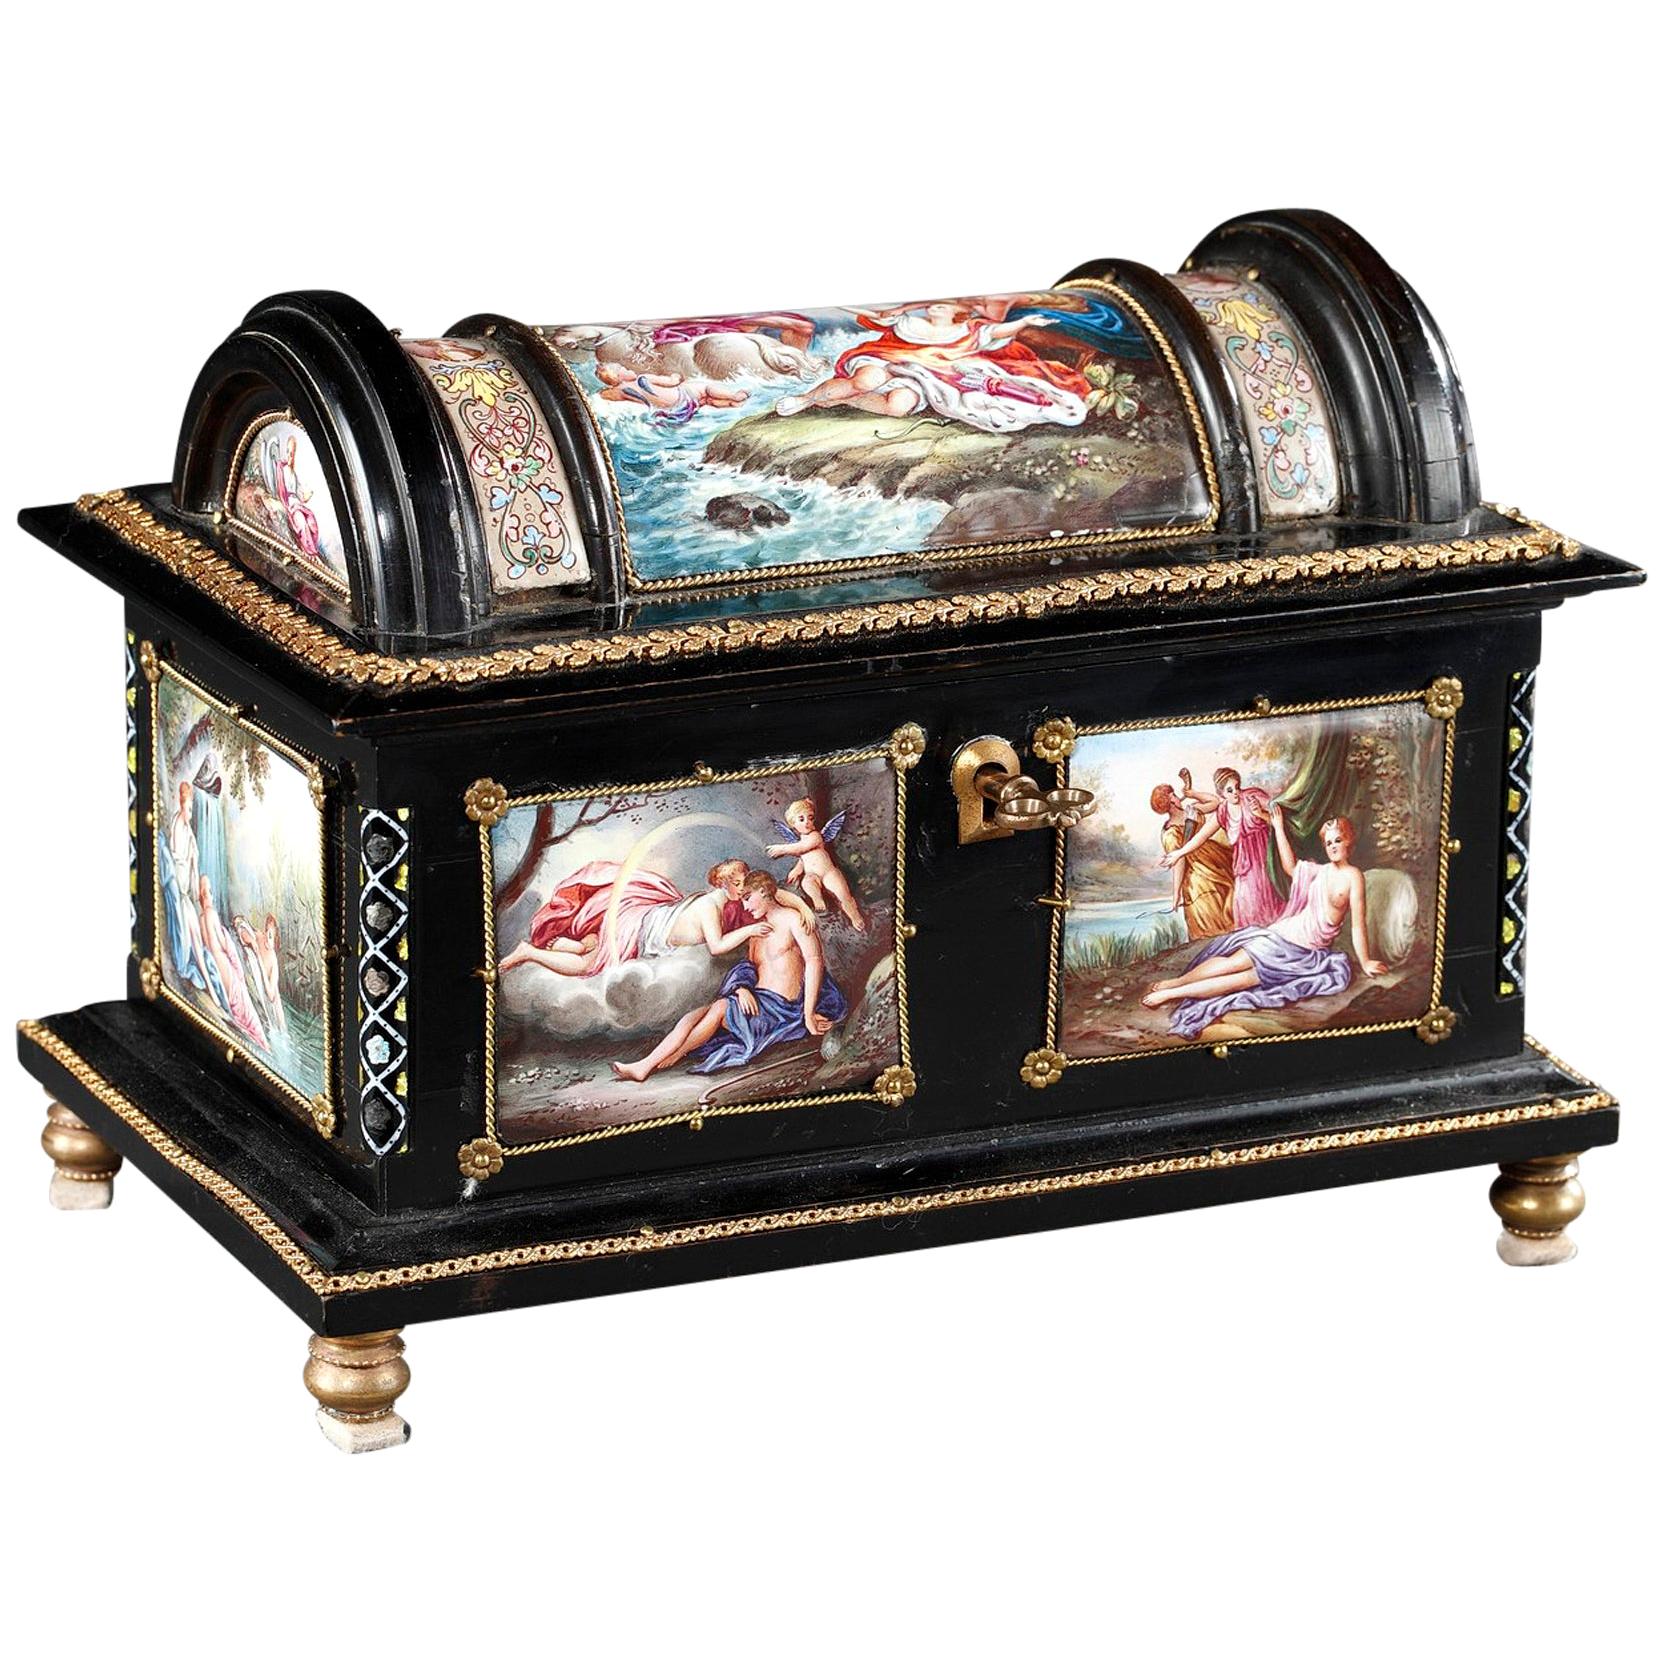 Enamel Coffer with Mythological Scenes Signed Klein in Paris, 19th Century For Sale